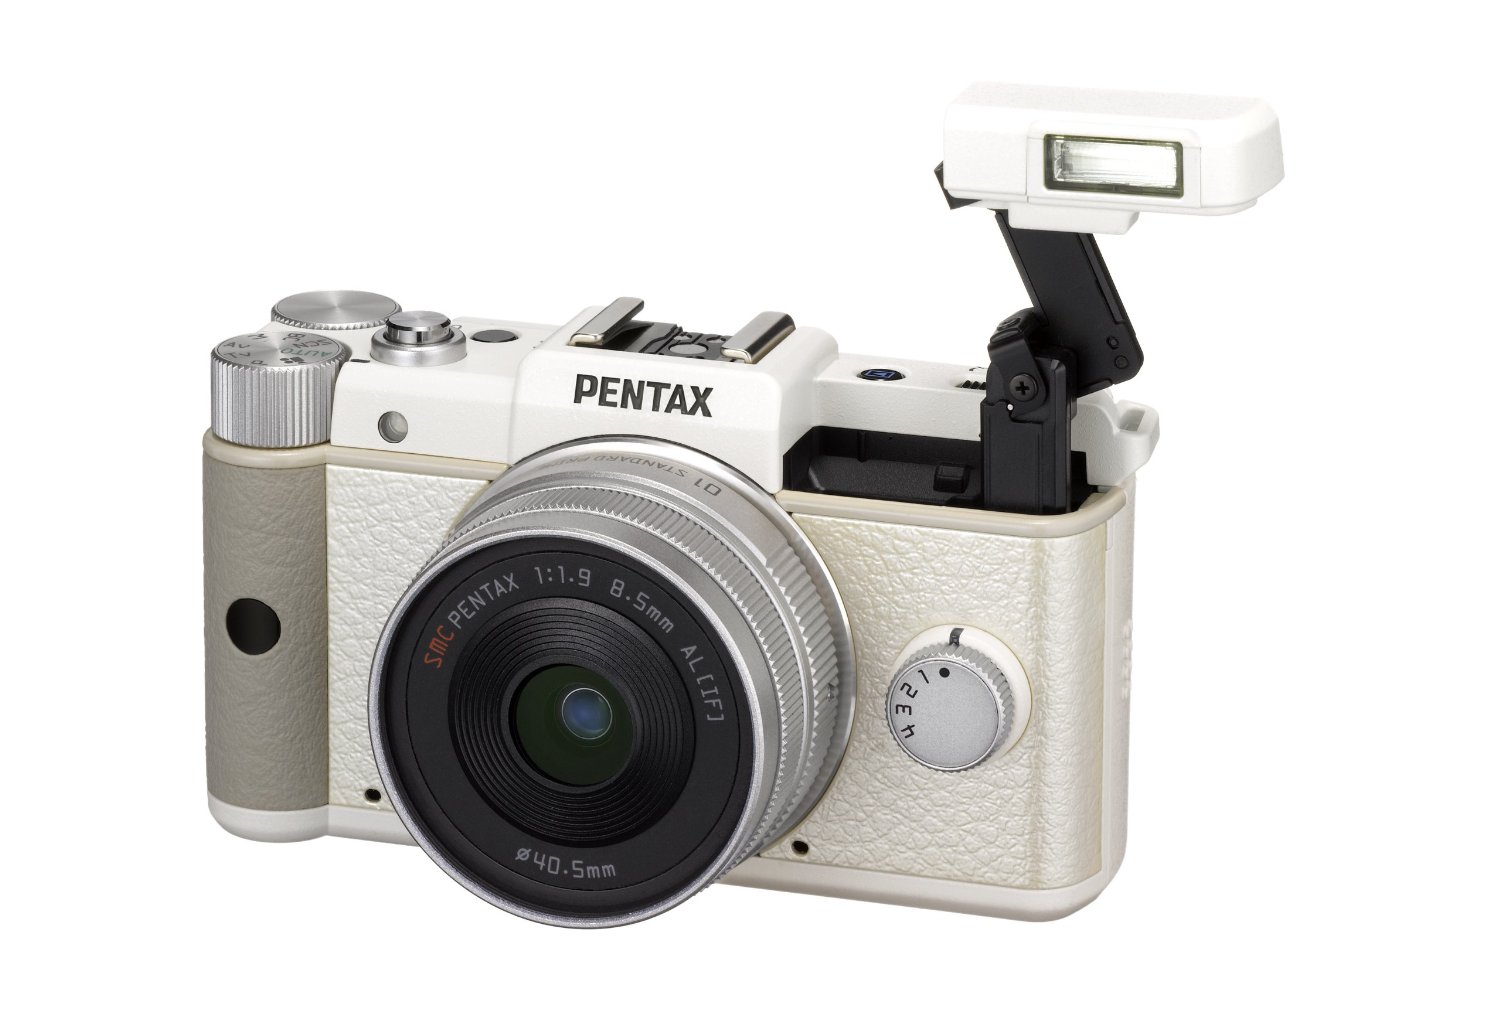 Pentax Q 12.4 MP CMOS Sensor Kit with 8.5mm 1.9 AL [IF] Prime Lens and 3x Optical Zoom 	$378.76